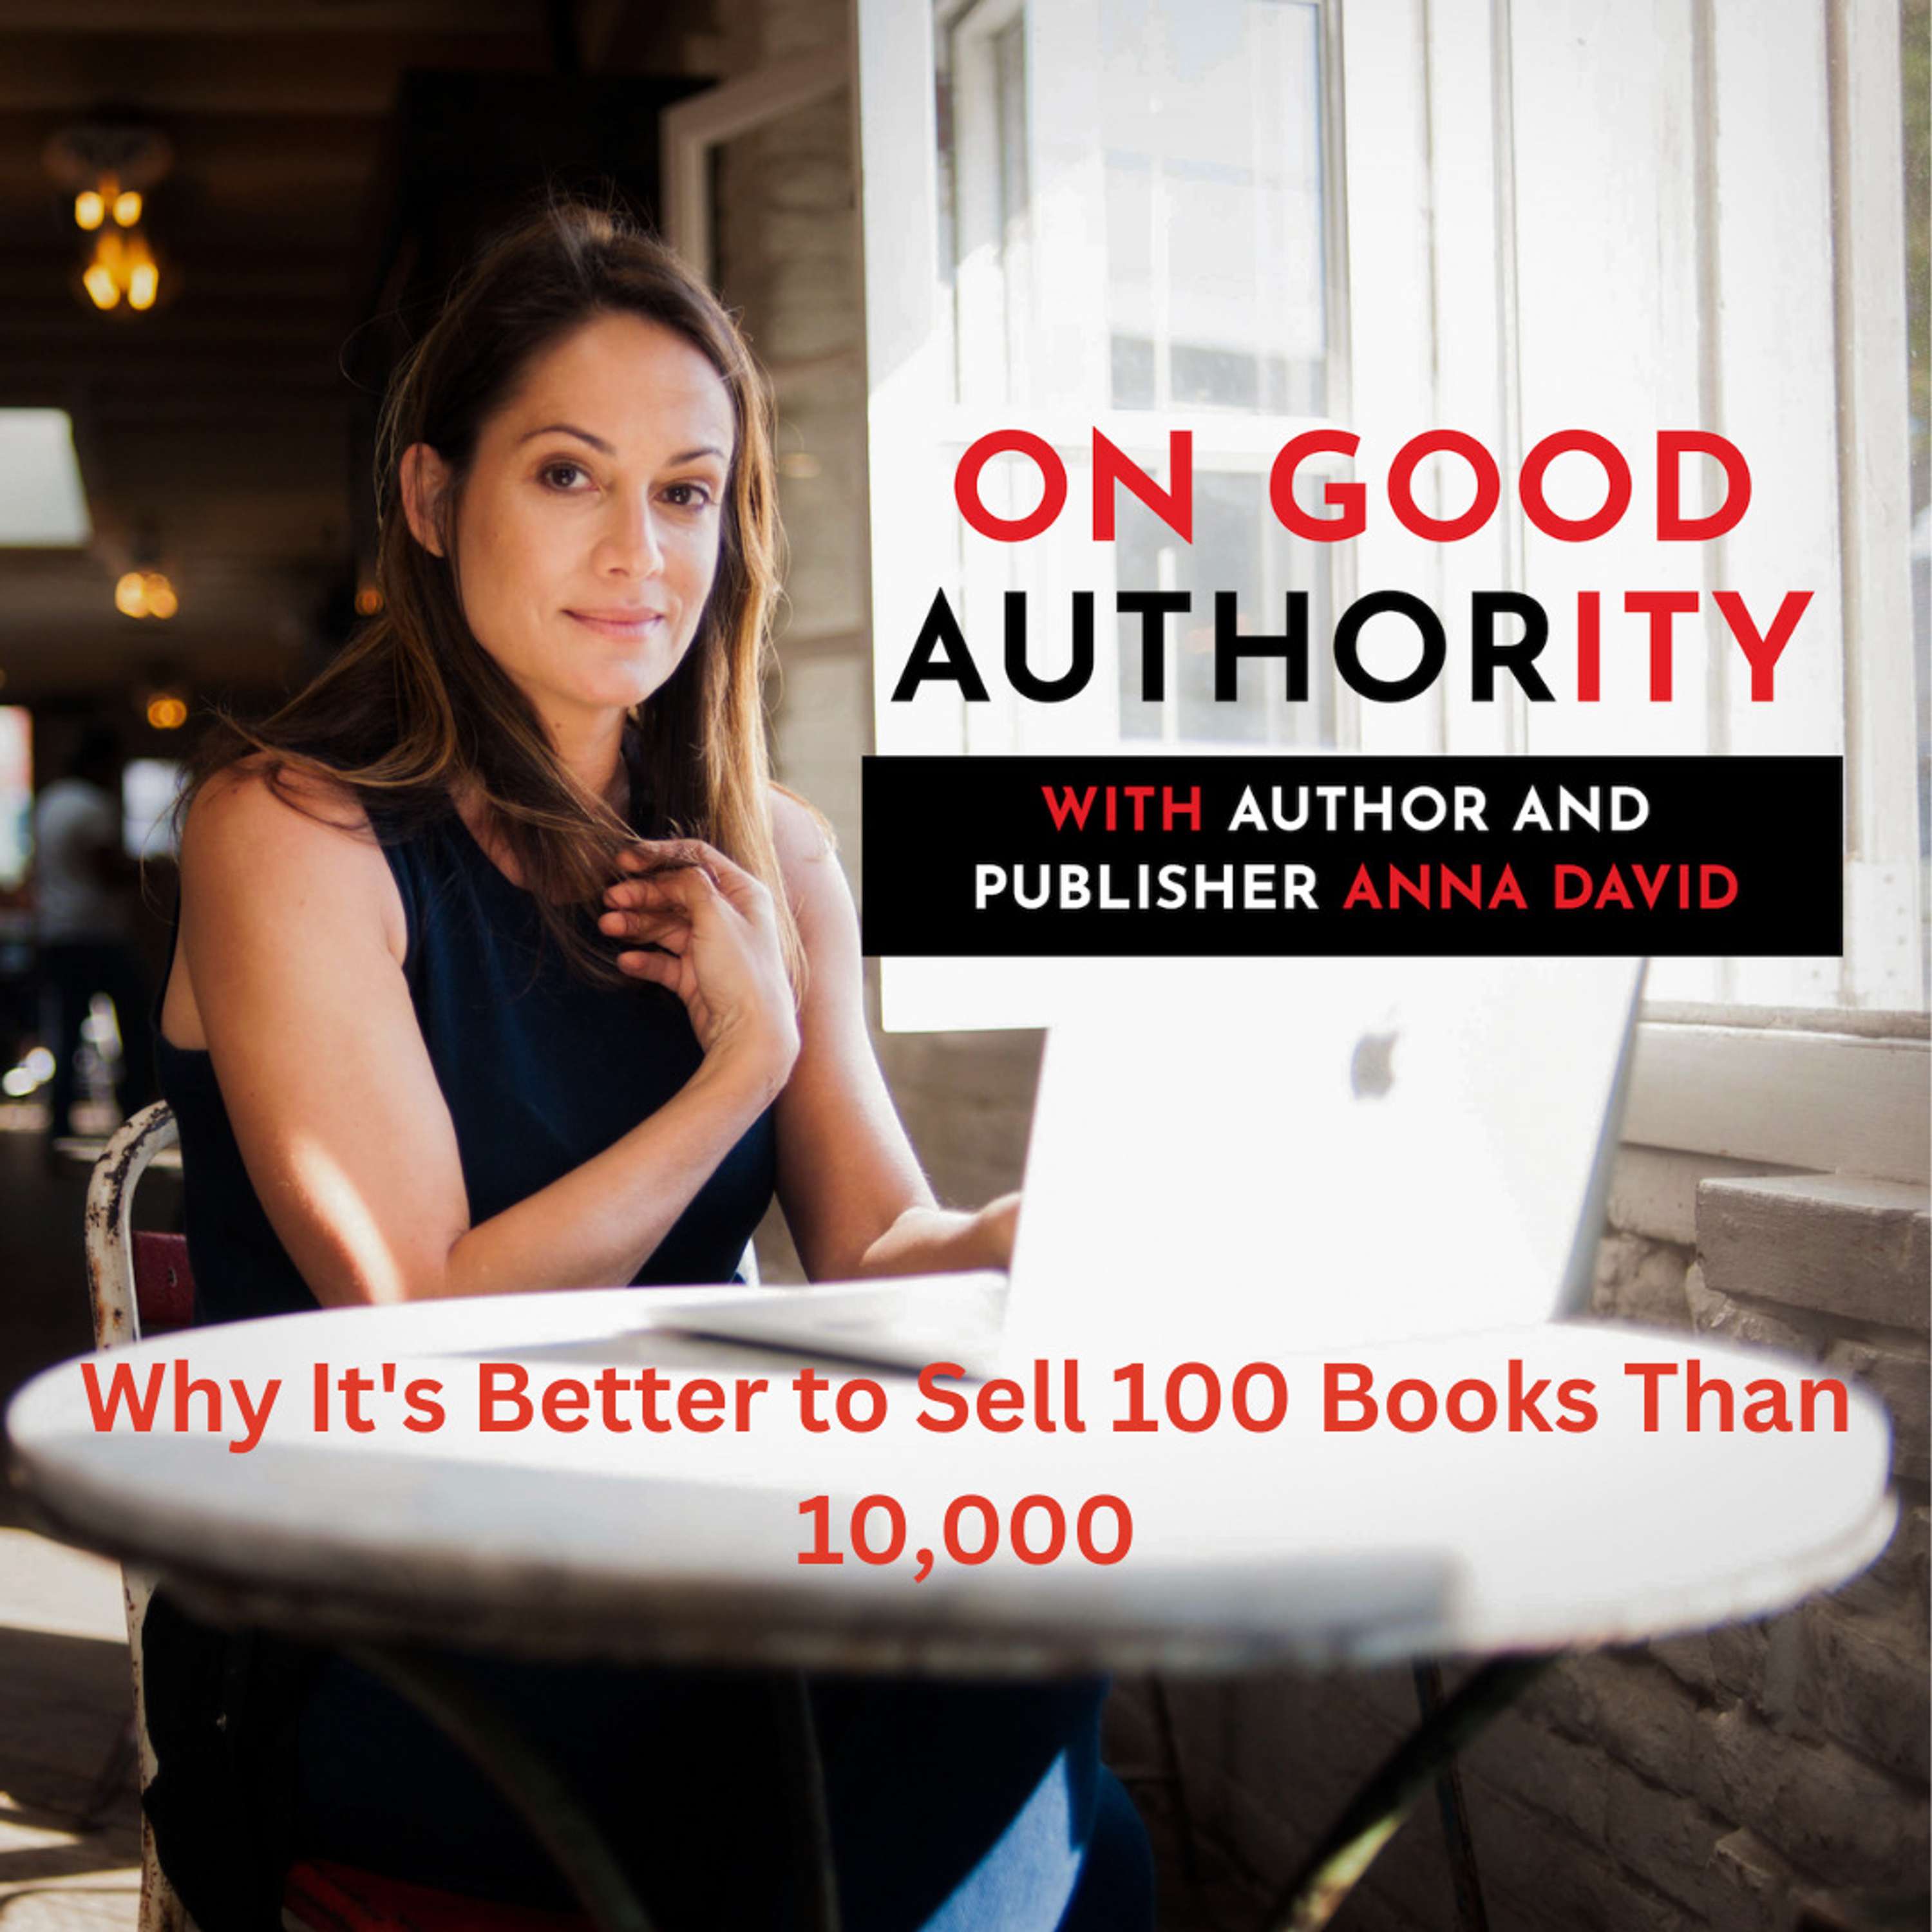 Why It’s Better to Sell 100 Books Than 10,000